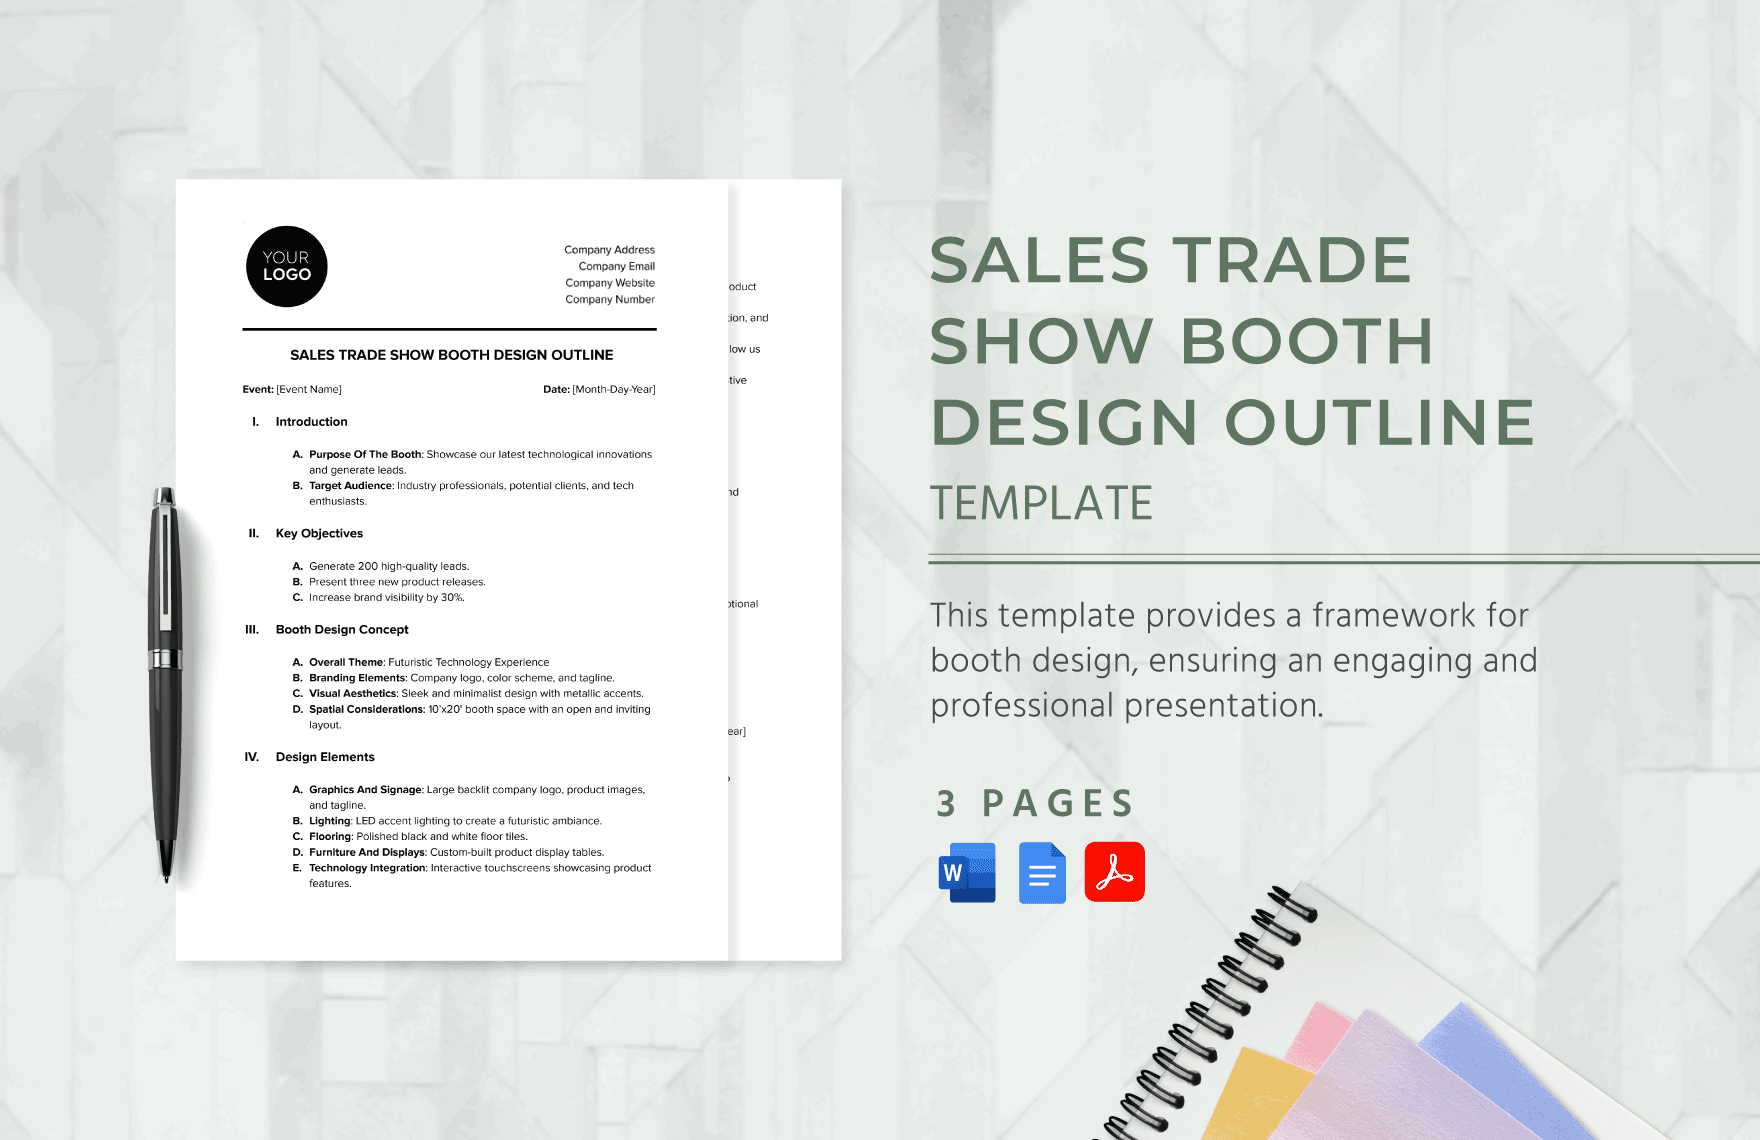 Sales Trade Show Booth Design Outline Template